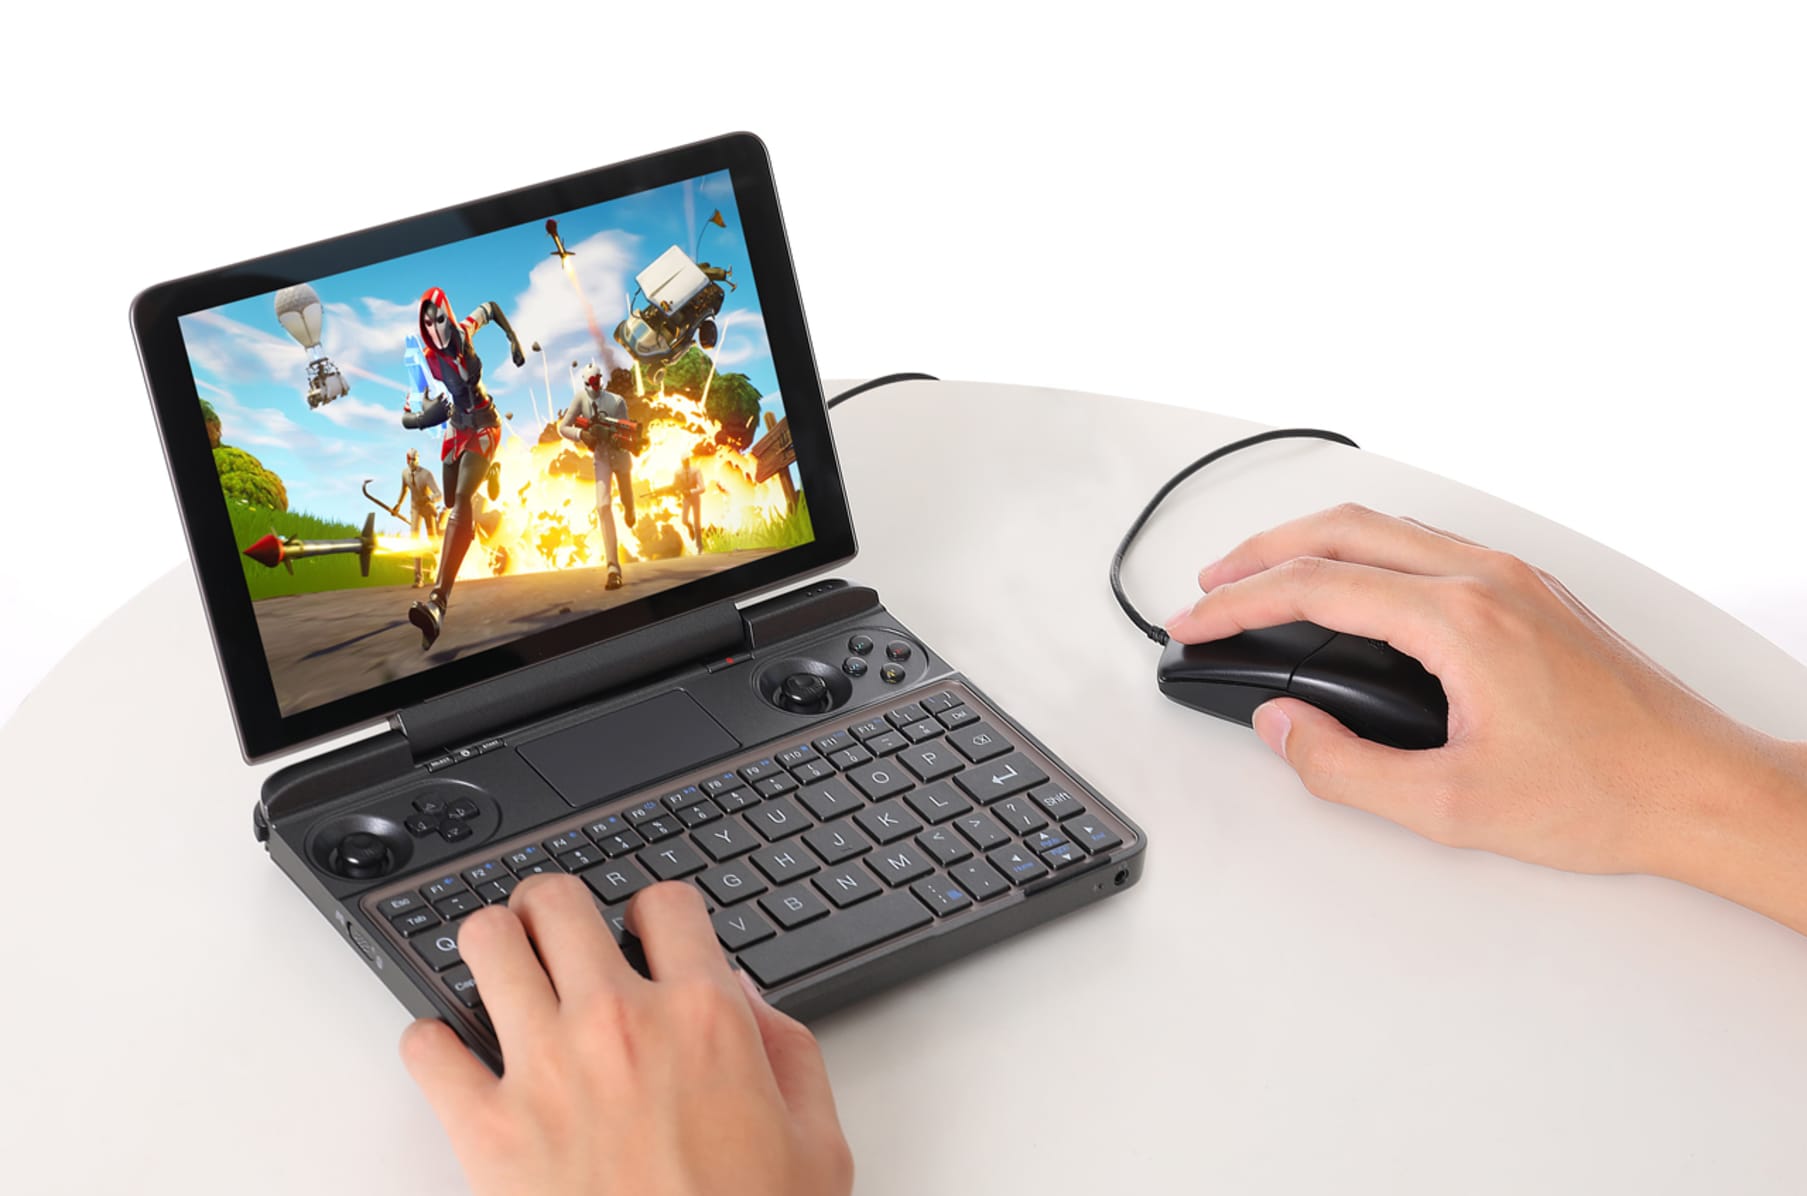 GDP Win Max, the world's smallest gaming laptop with integrated controllers for gaming